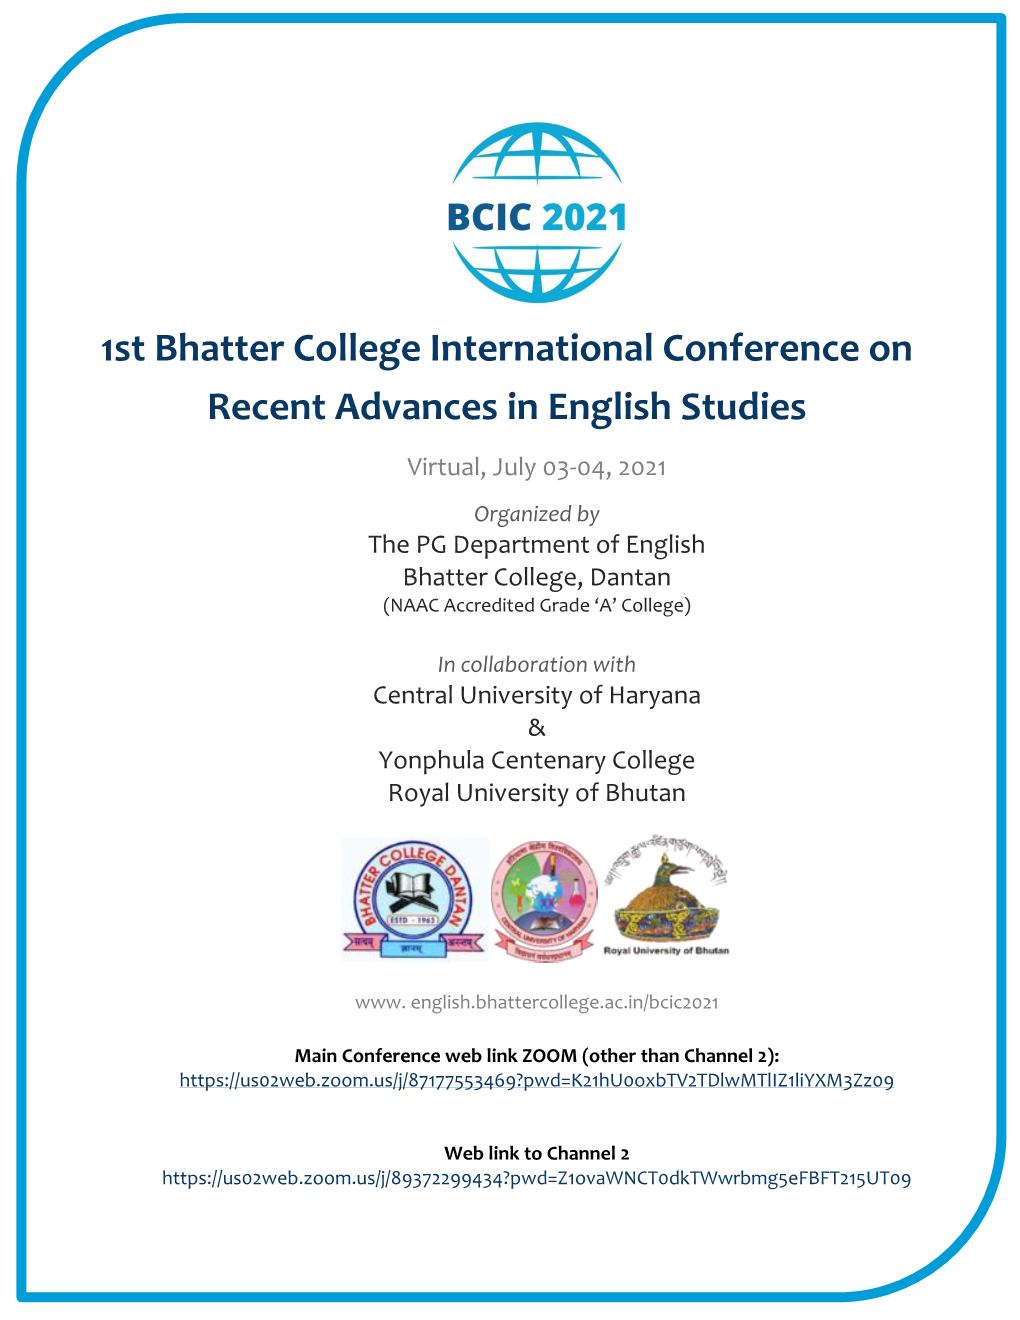 1St Bhatter College International Conference on Recent Advances In